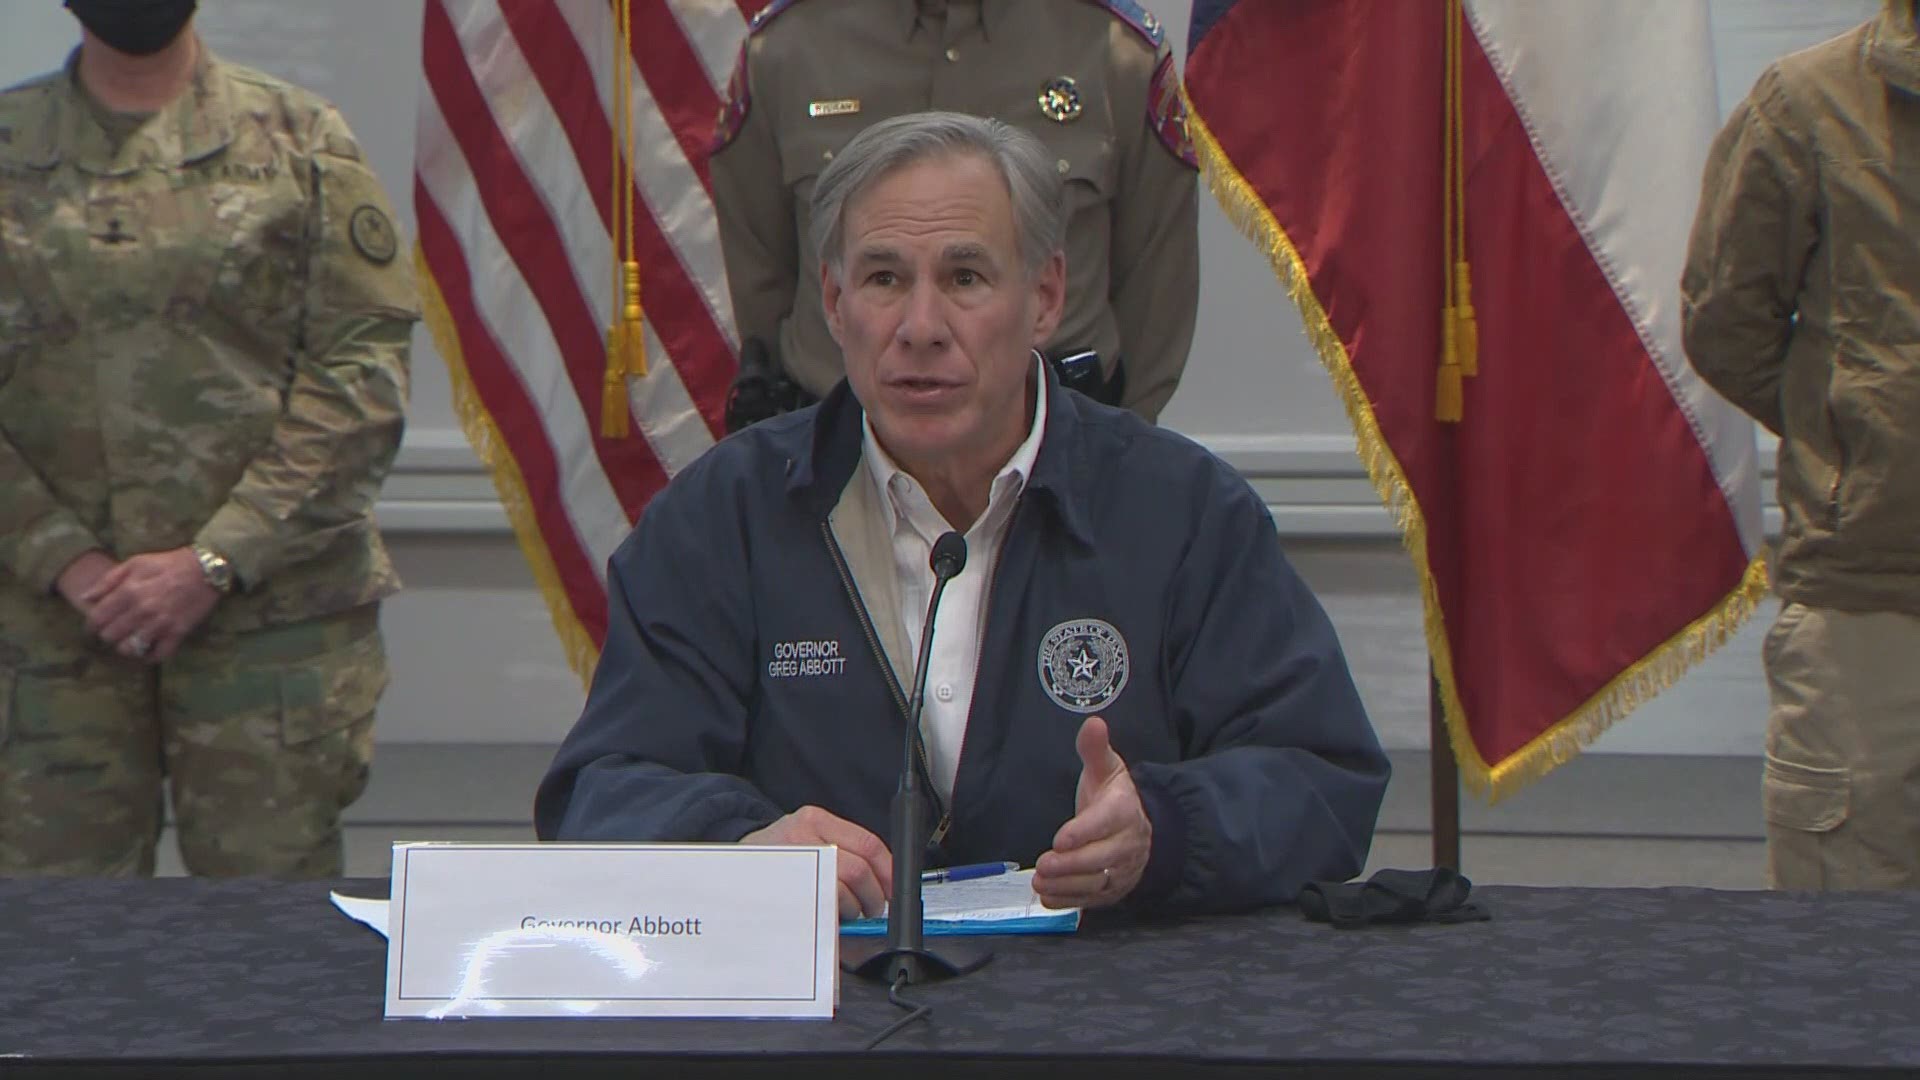 Texas is in the midst of an energy crisis. Gov. Abbott provides an update.